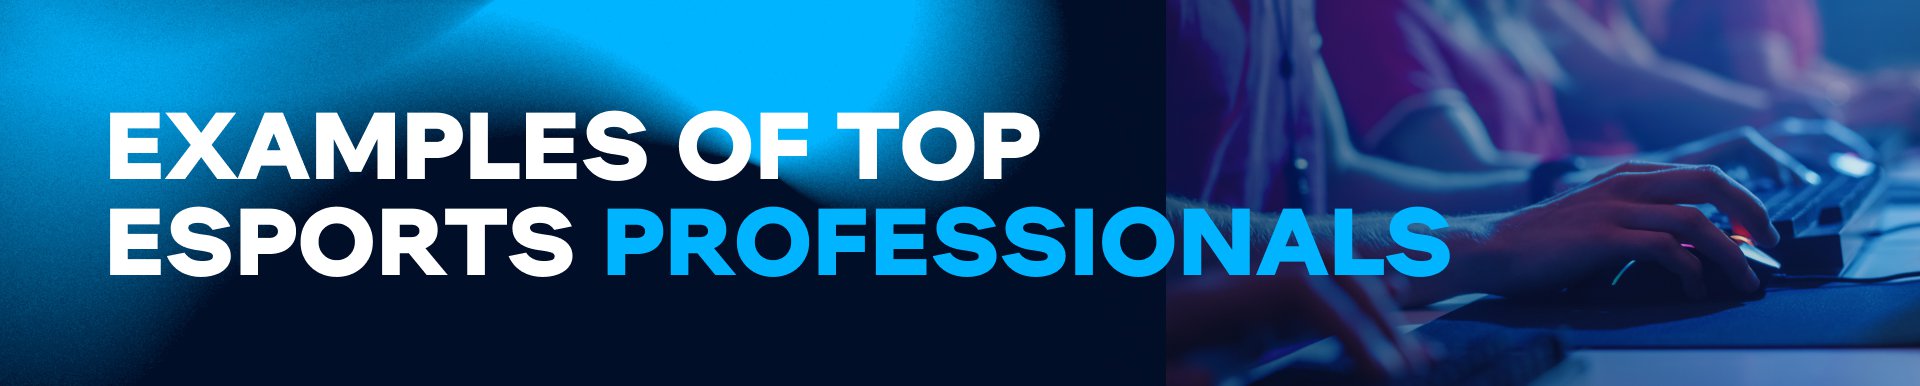 Examples of Top Esports Professionals. Image: WePlay Holding